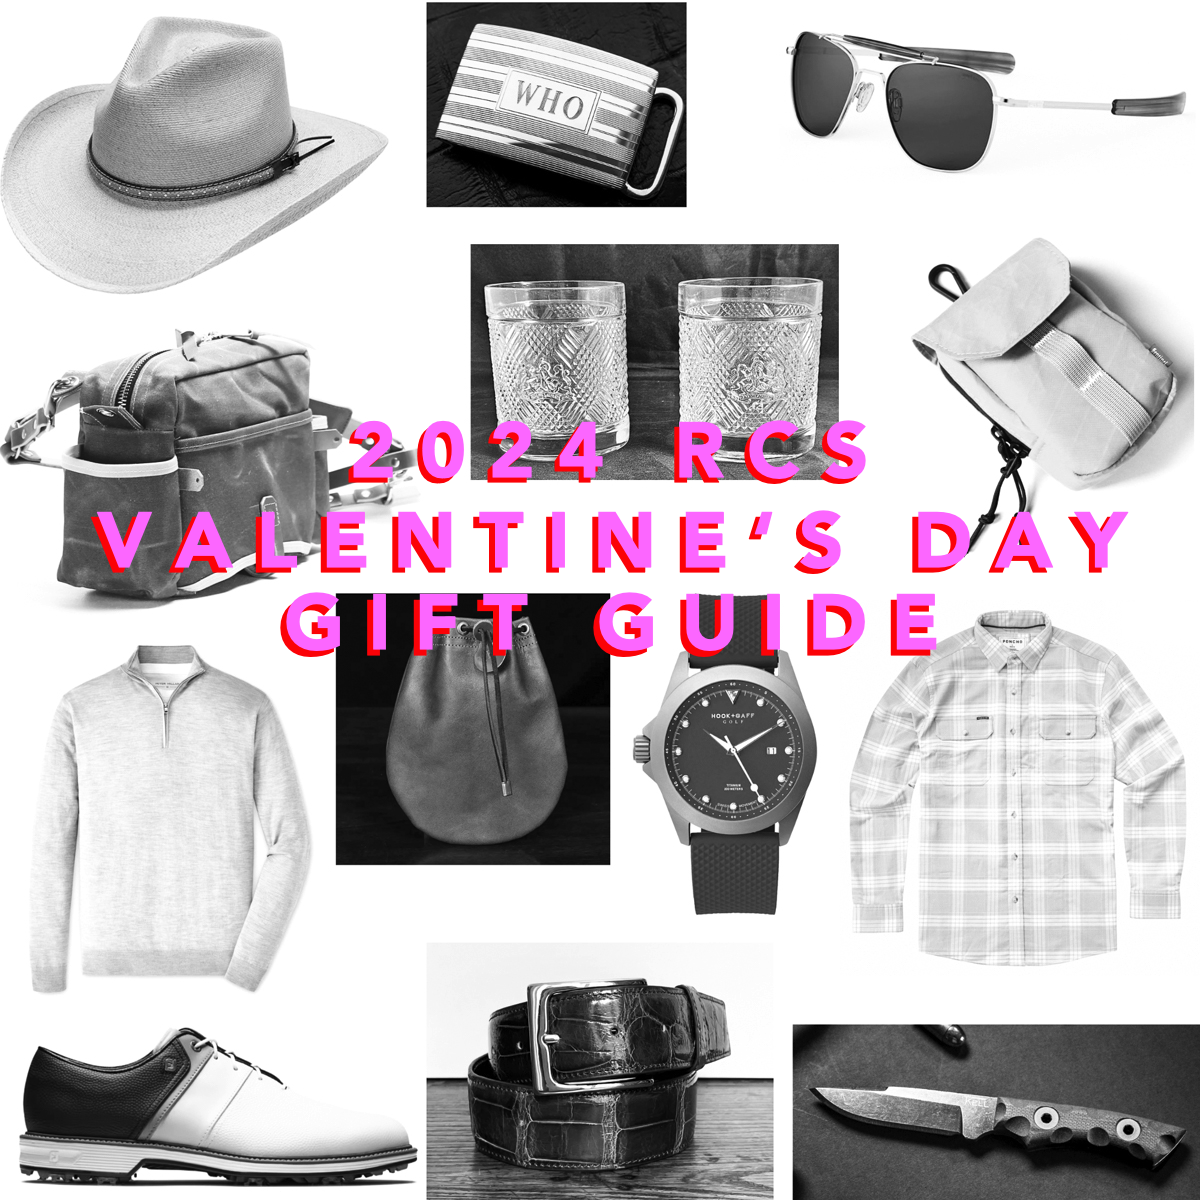 Valentine's Day Gift Guide for Men –